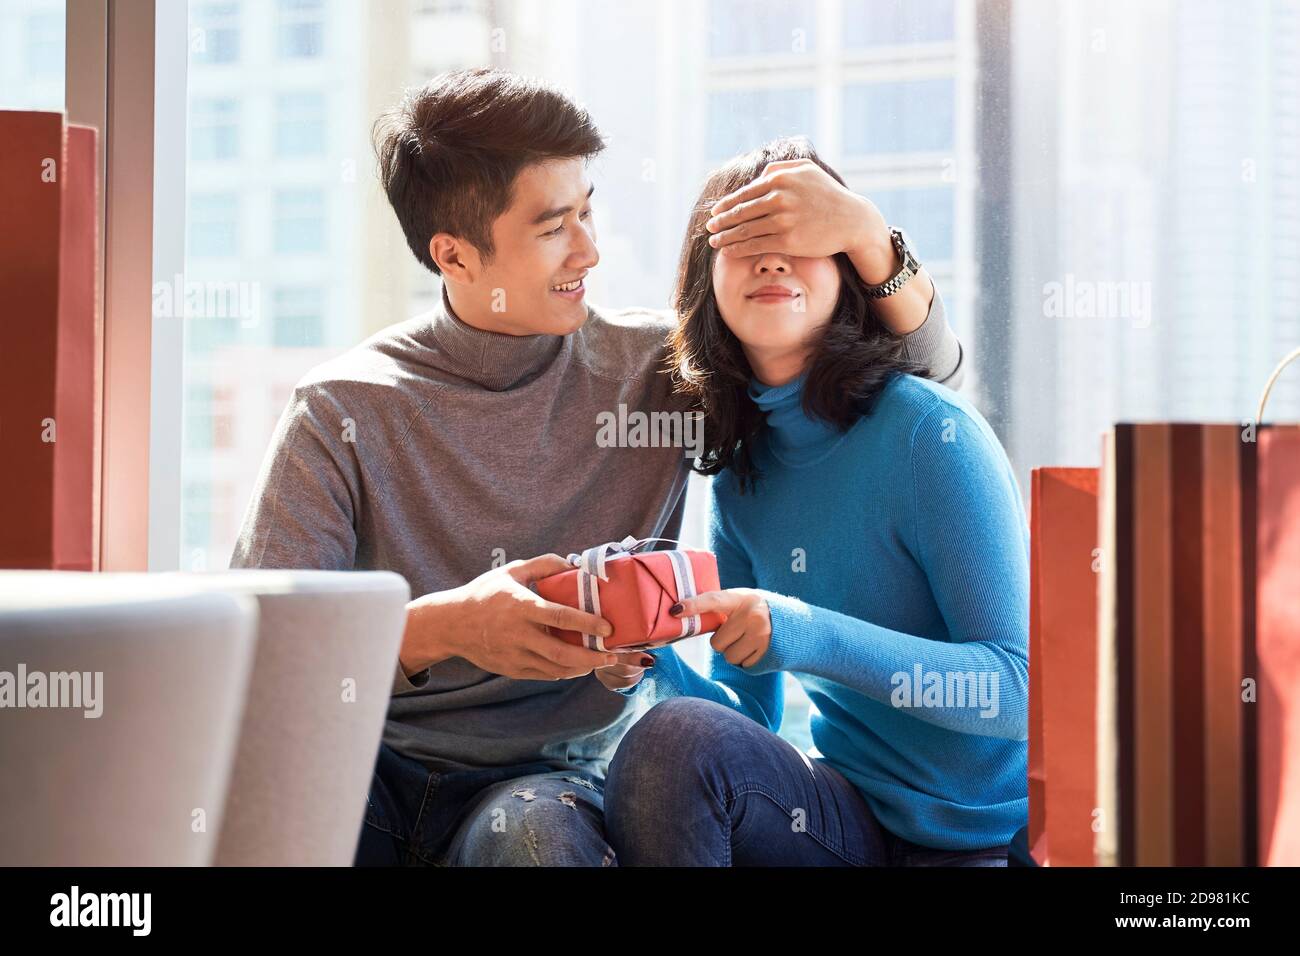 asian man giving young woman girlfriend a christmas or birthday gift Stock Photo